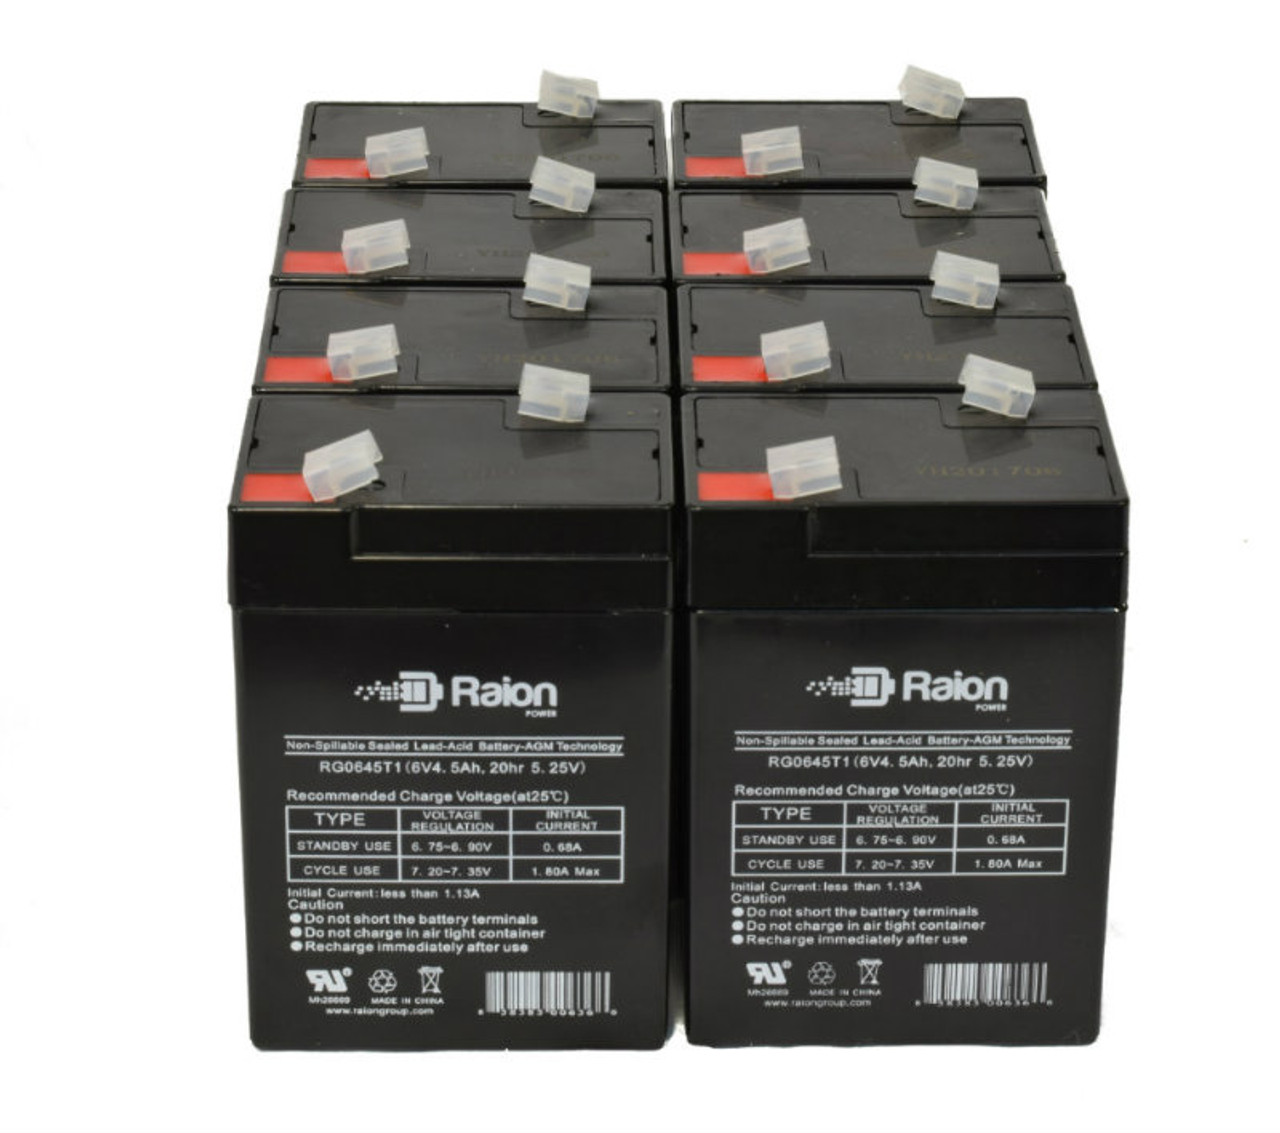 Raion Power 6 Volt 4.5Ah RG0645T1 Replacement Battery for LONG WP5-6 - 8 Pack